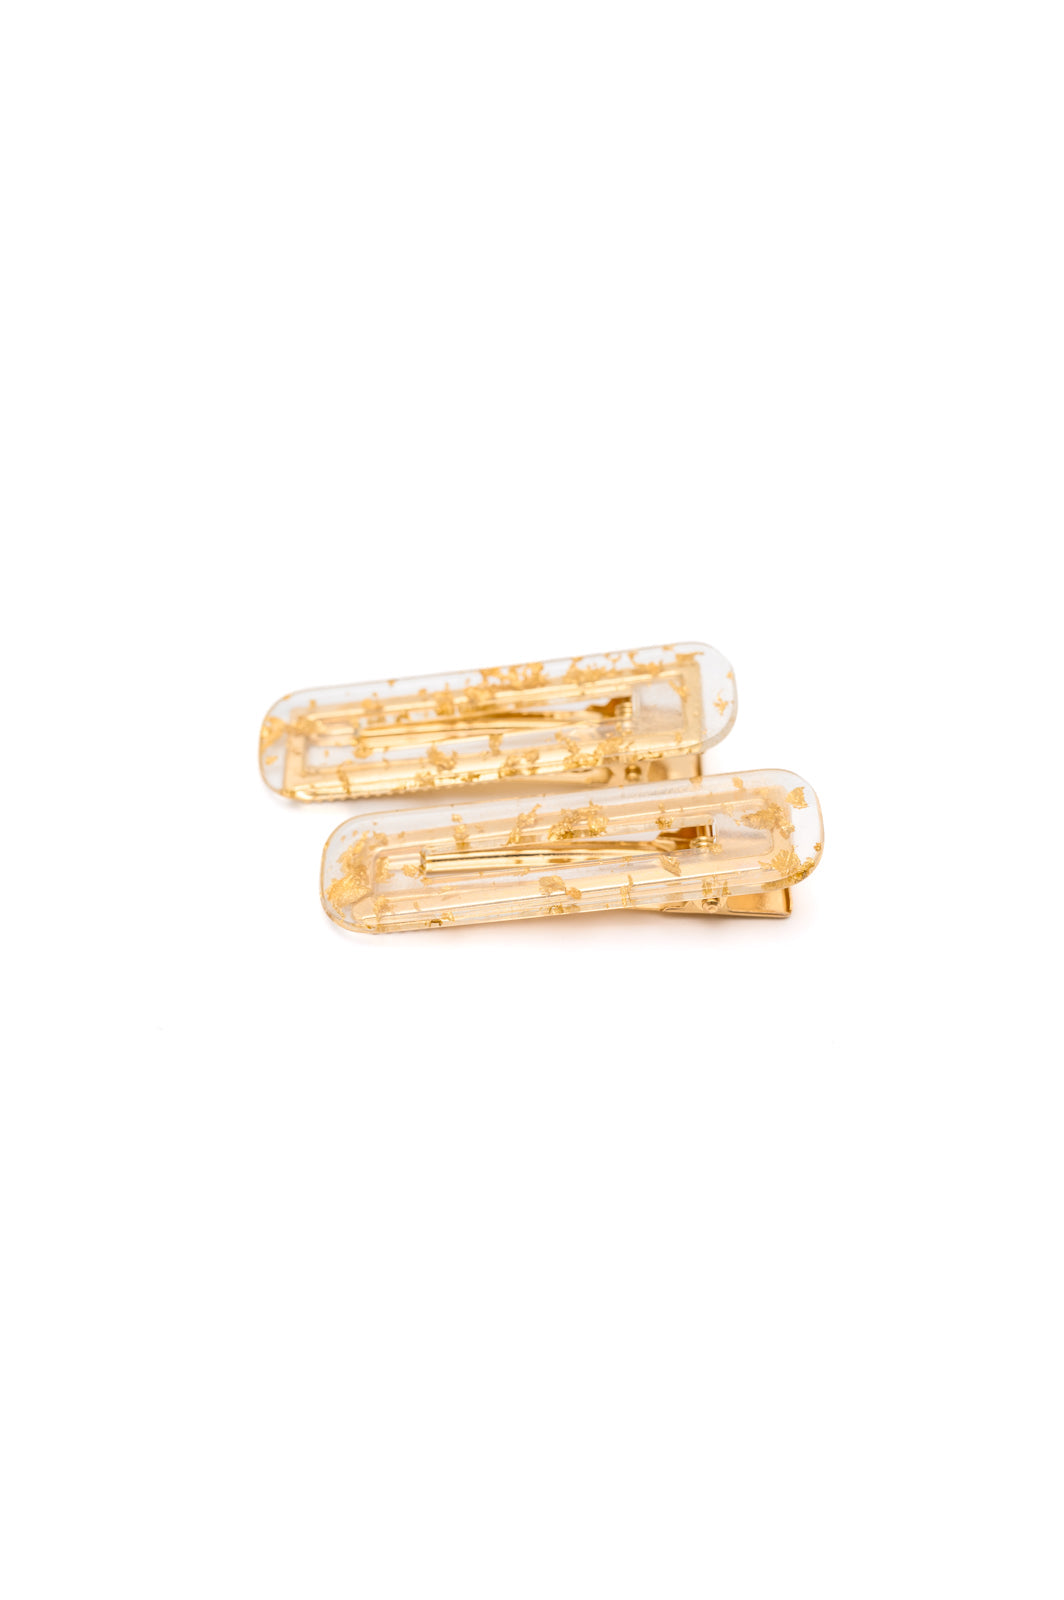 Double Trouble 2 Pack Hair Clip in Gold Leaf |   |  Casual Chic Boutique